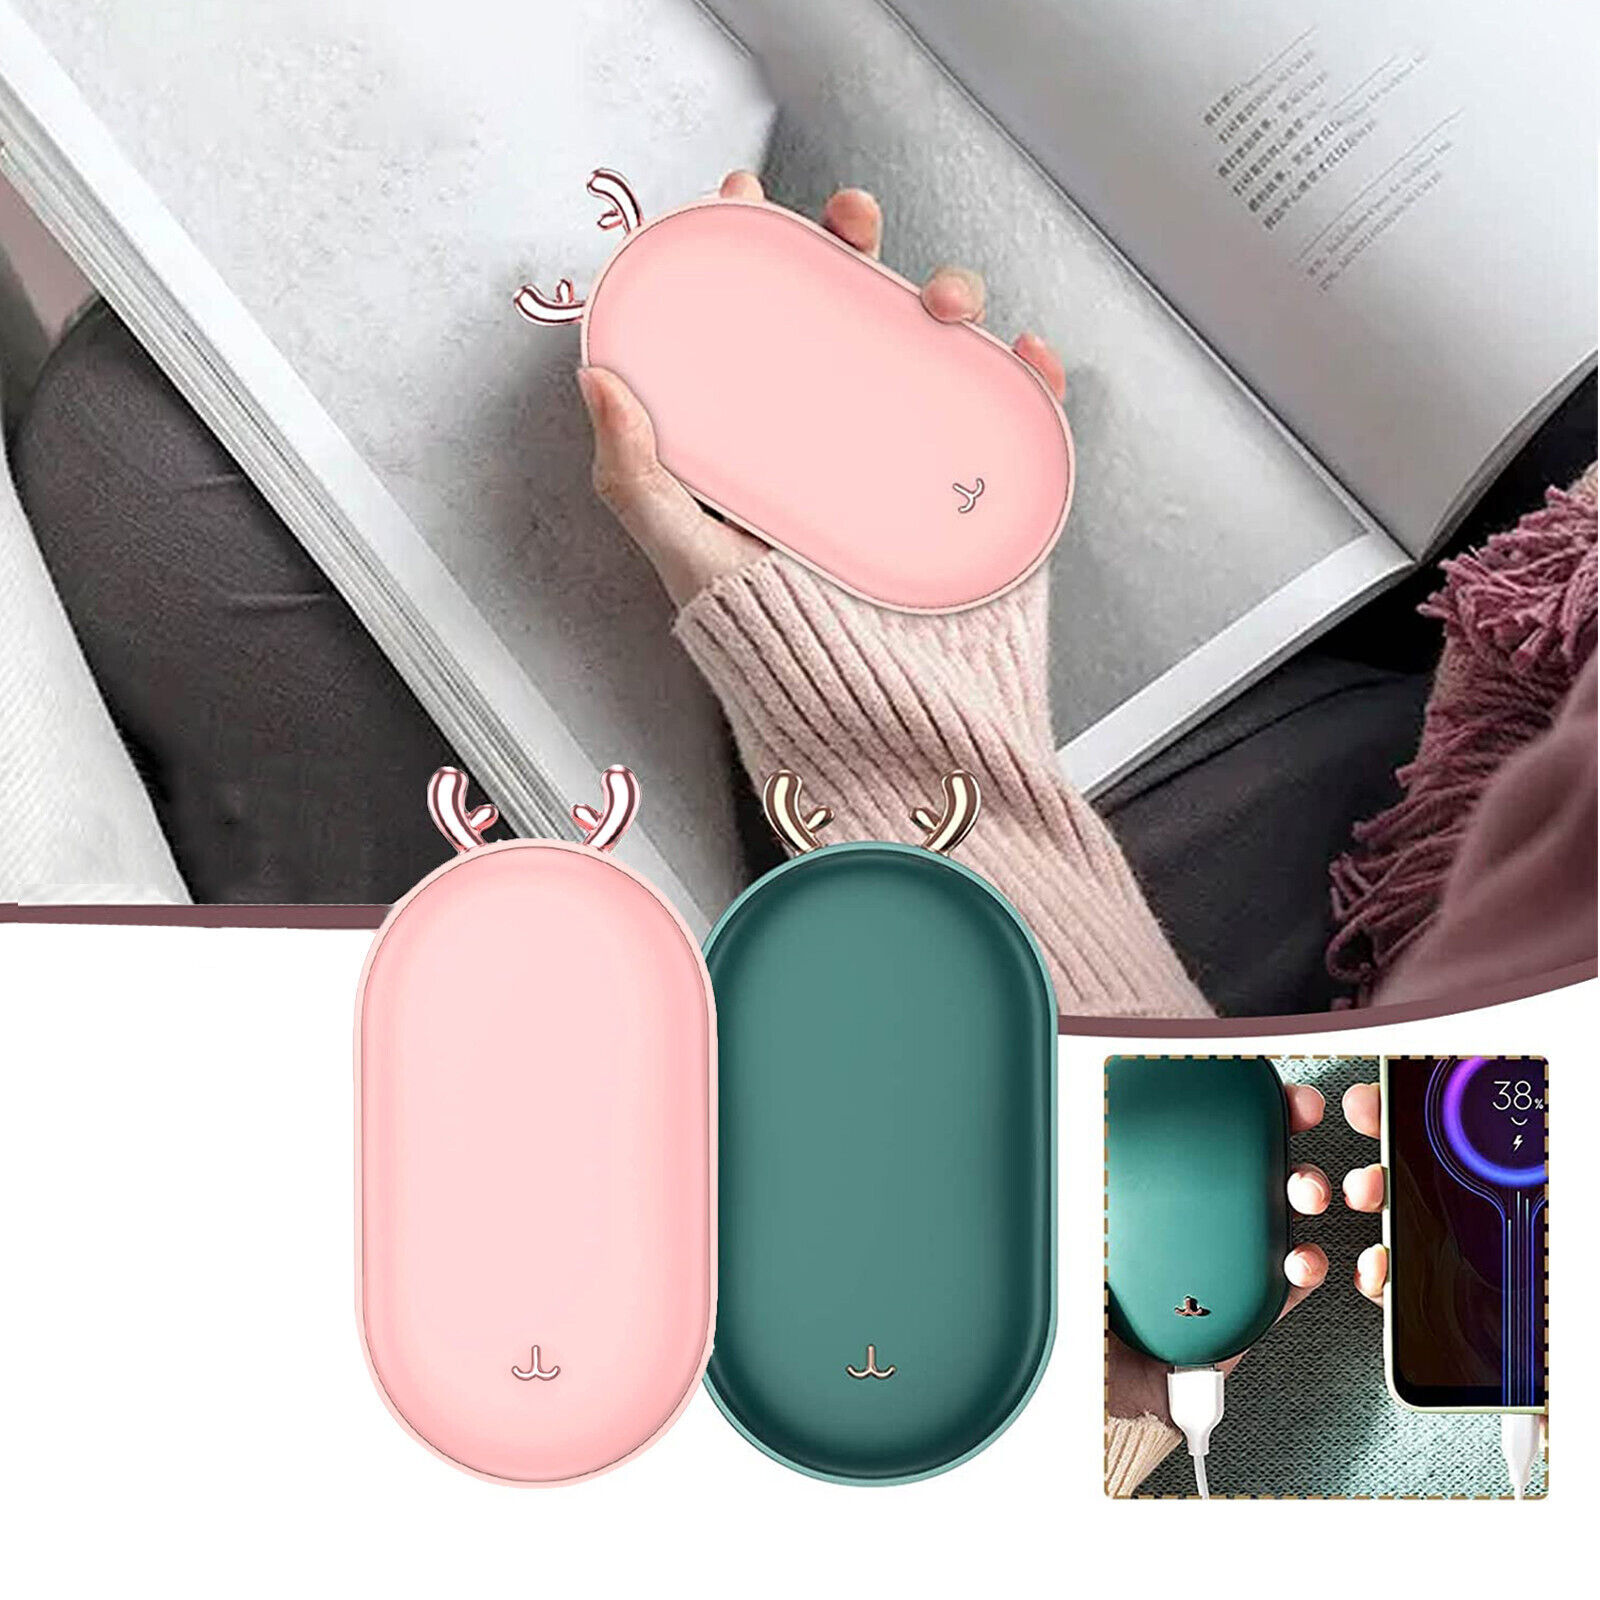 Usb Rechargeable Double Side Hand Warmer With Portable Power Charge Bank